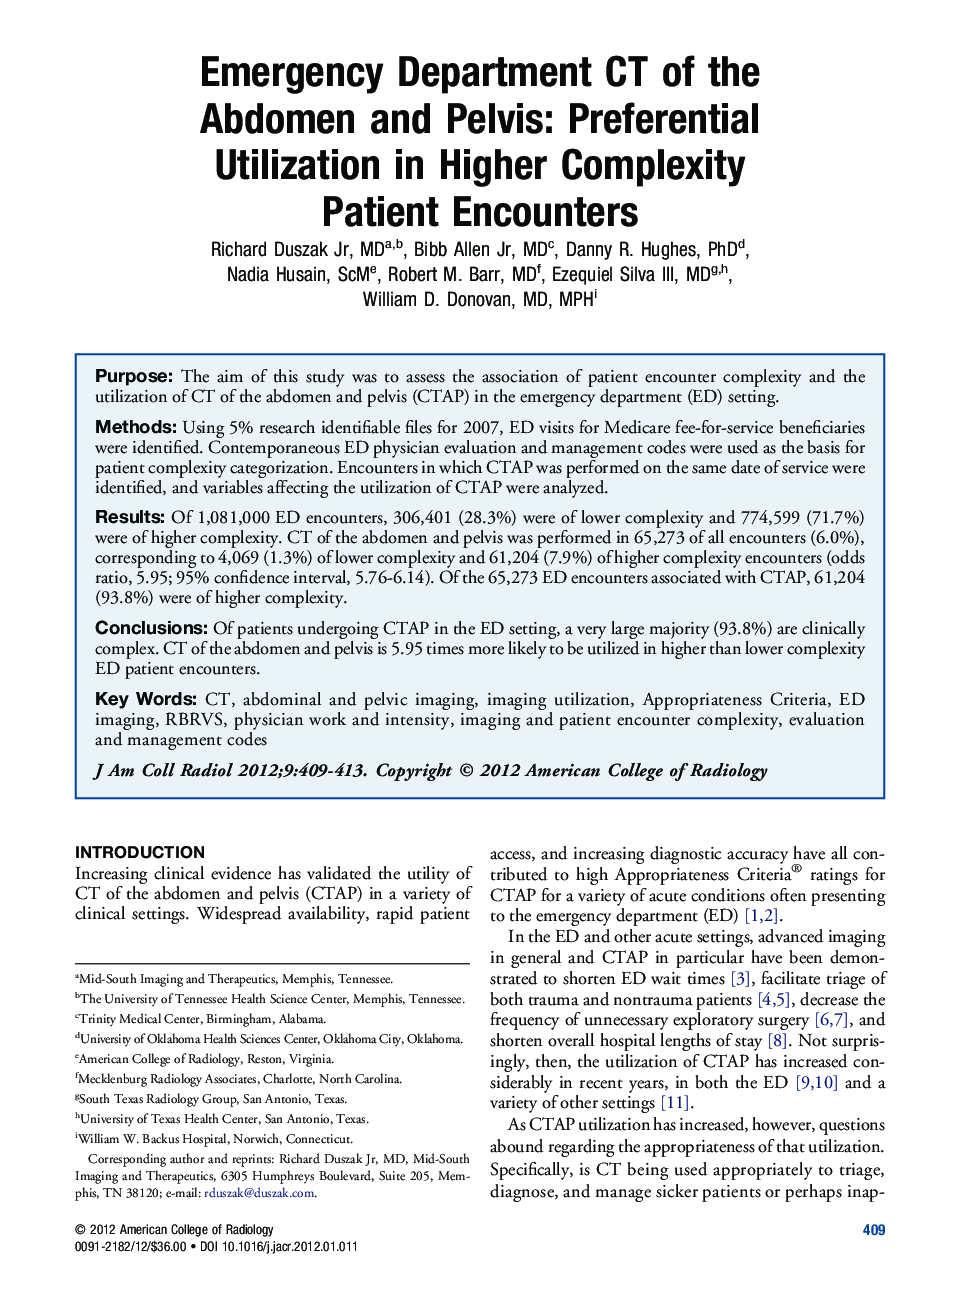 Emergency Department CT of the Abdomen and Pelvis: Preferential Utilization in Higher Complexity Patient Encounters